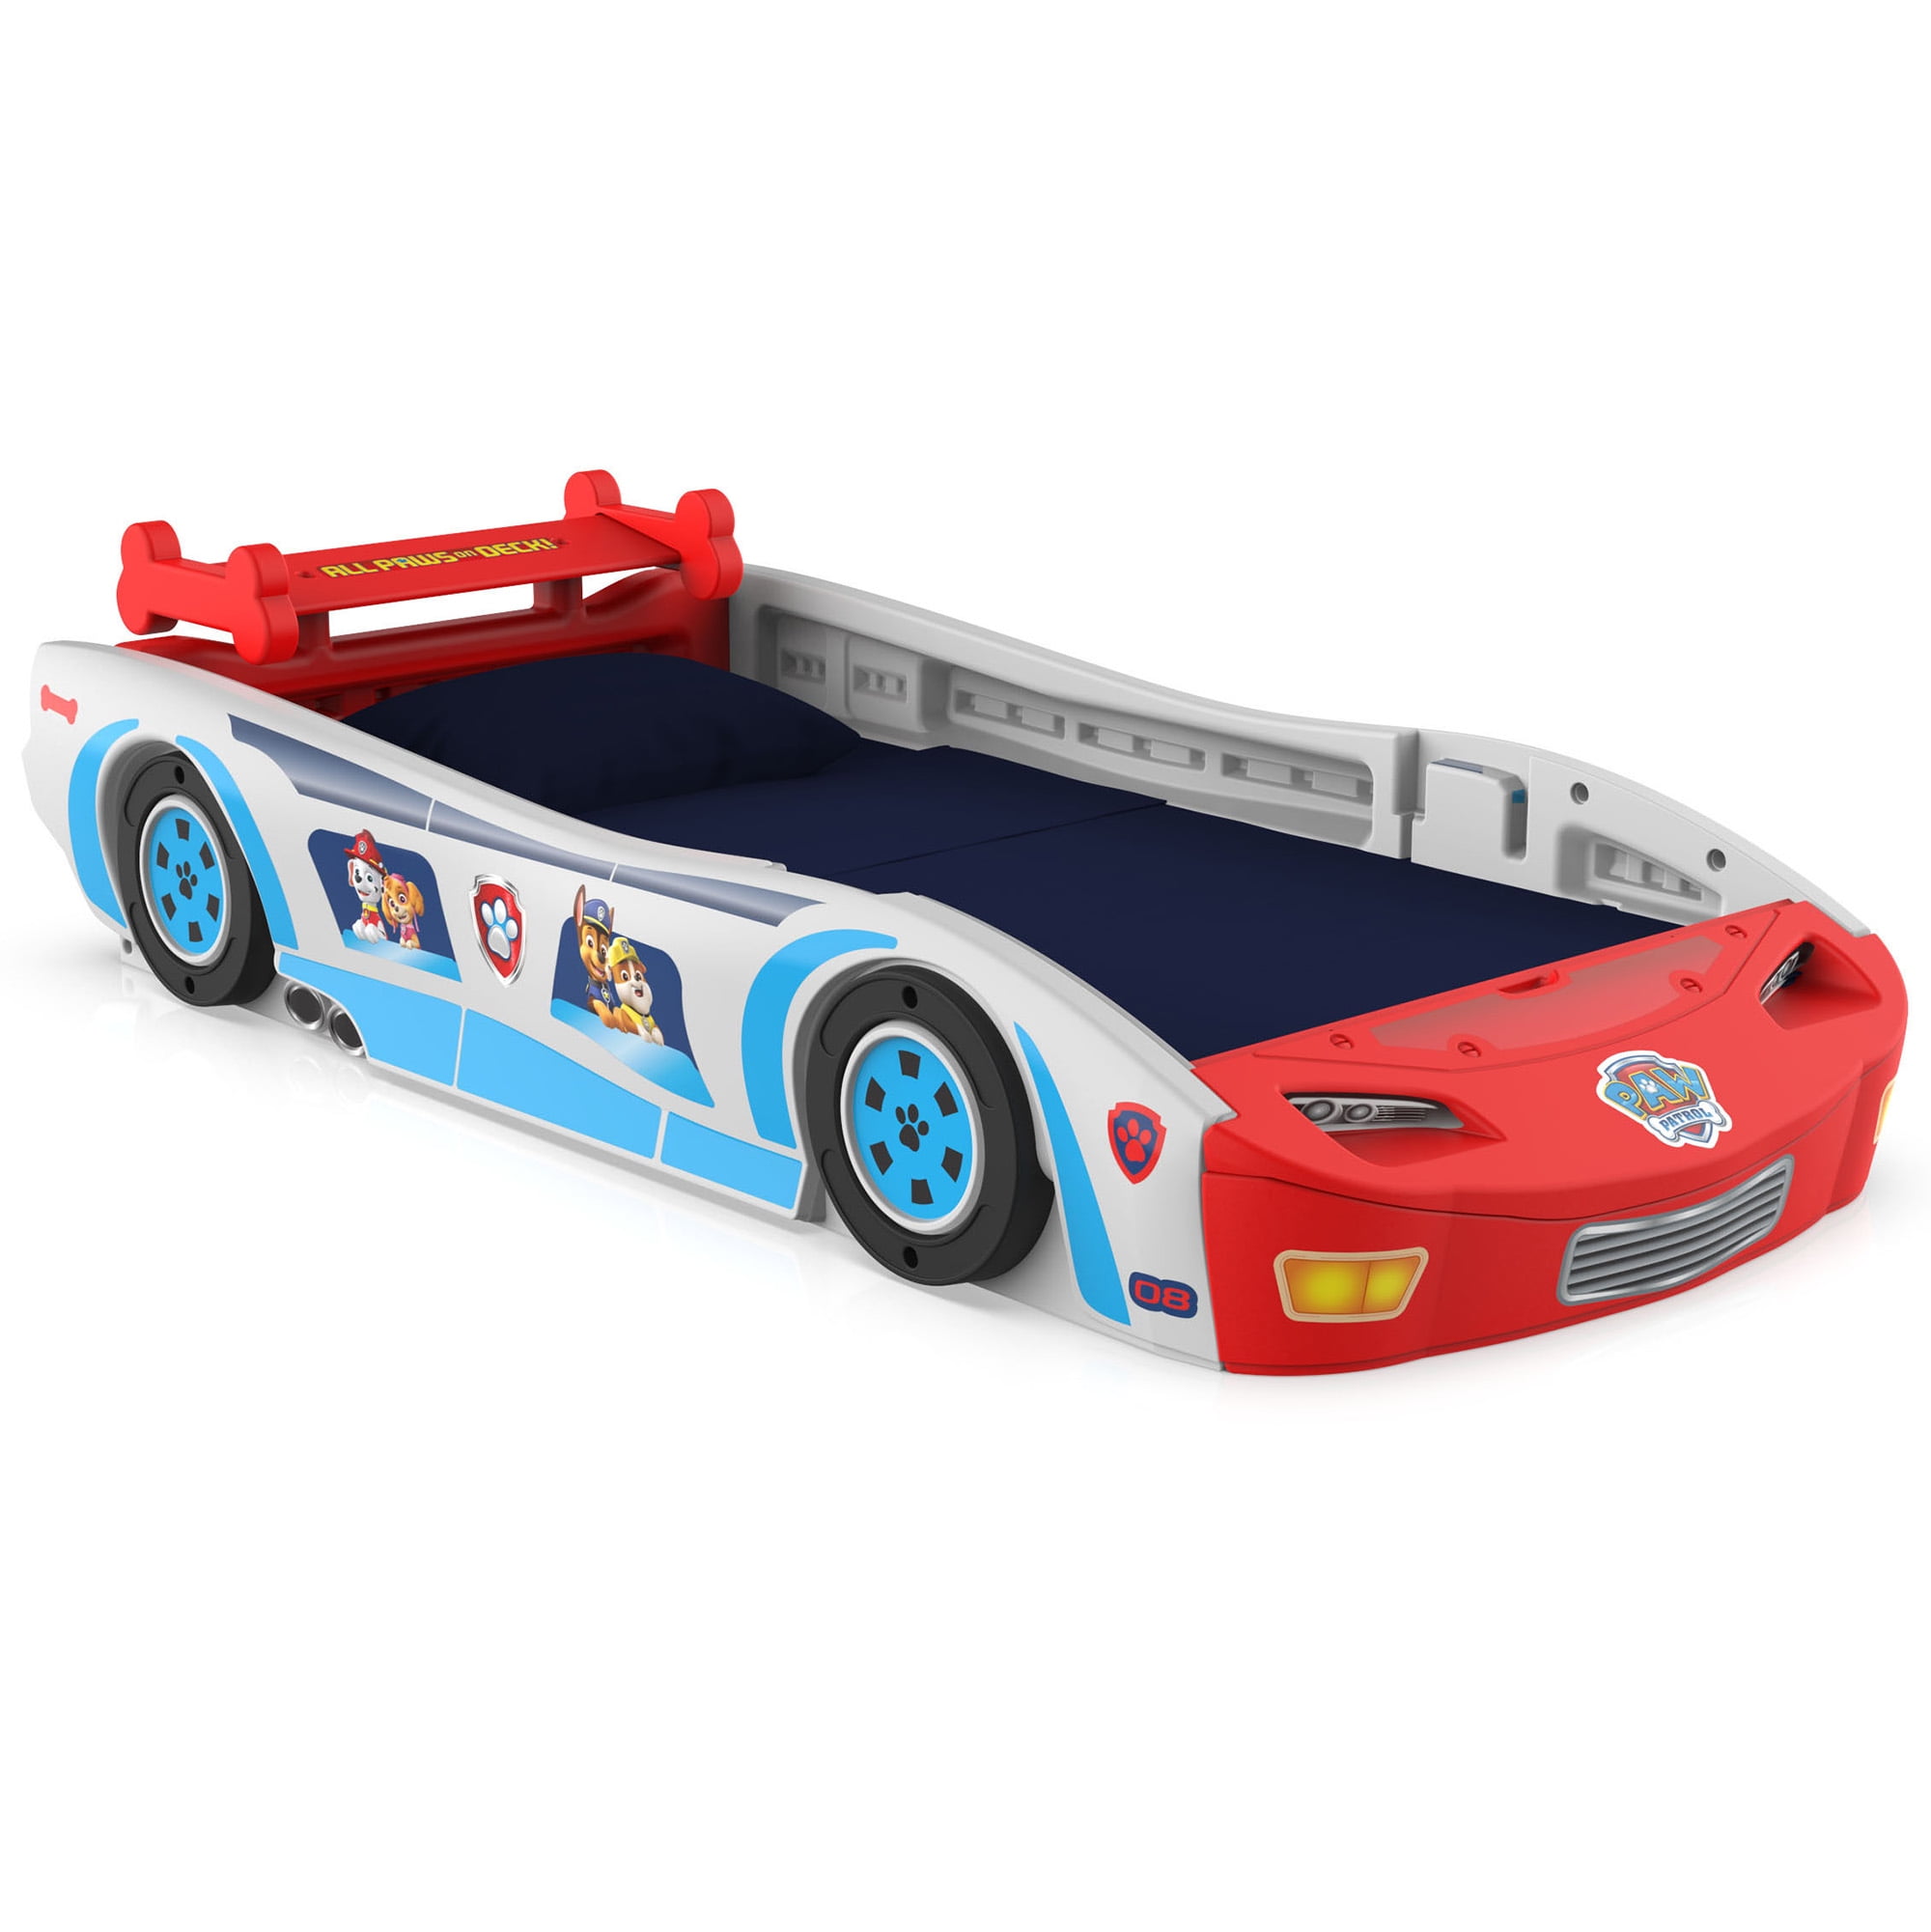 Children Twin Bed Turbo Race Car w/ Rear Spoiler And Tires Bedroom Furniture Red 